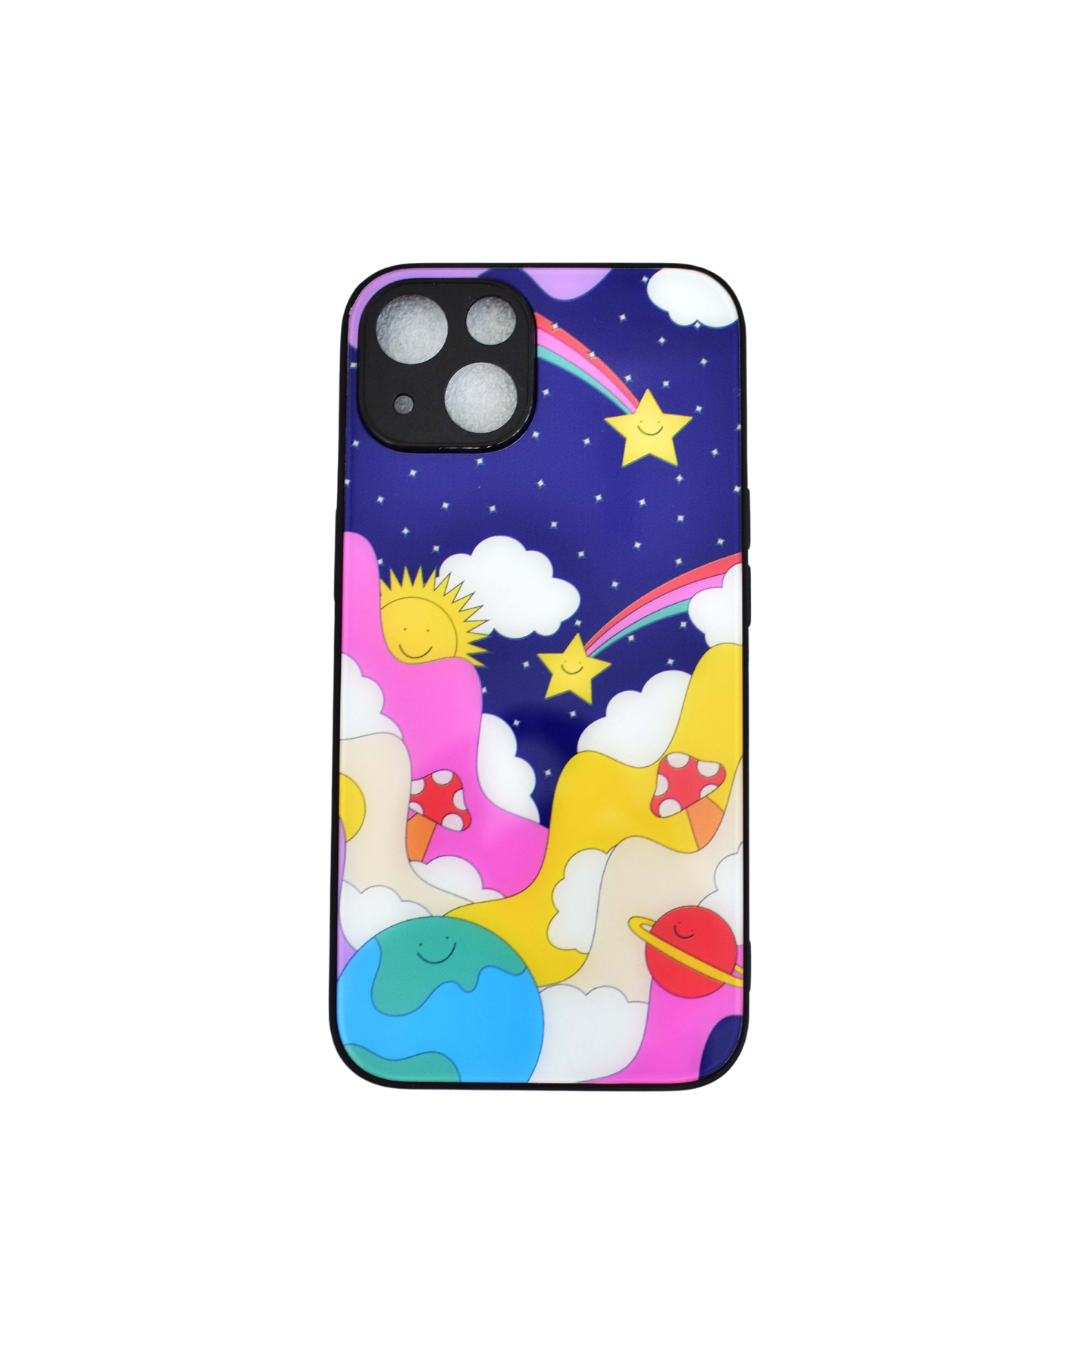 The Sky is The Limit iPhone Case